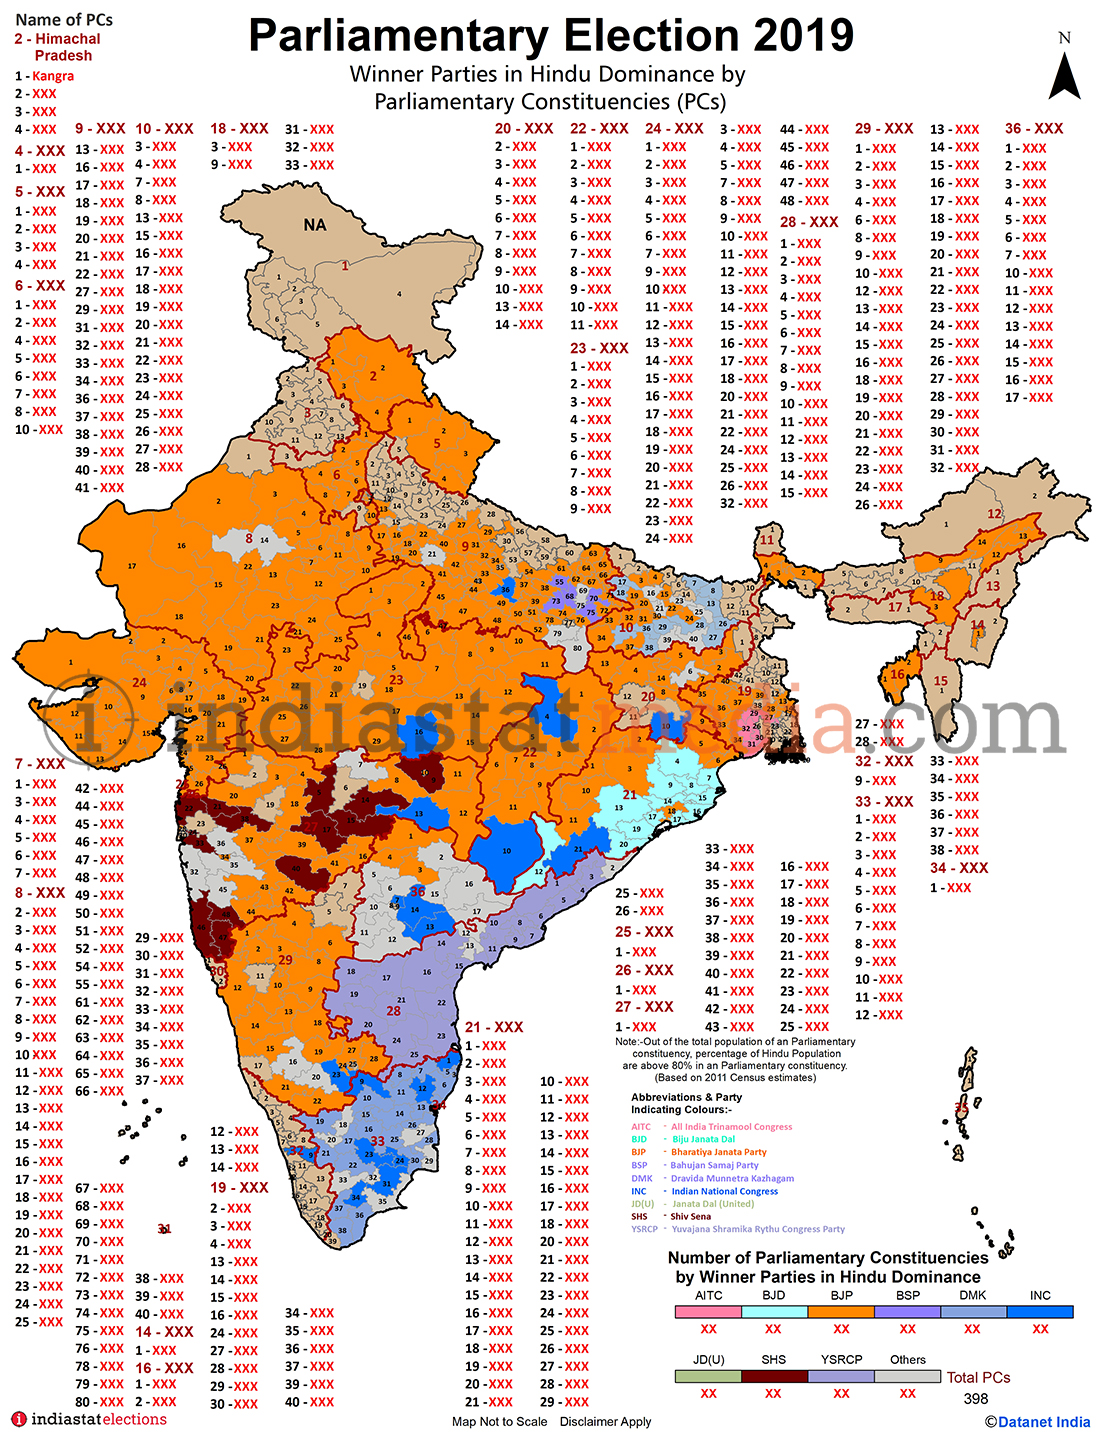 Winner Parties in Hindu Dominance by Parliamentary Constituencies in India (Parliamentary Election - 2019)